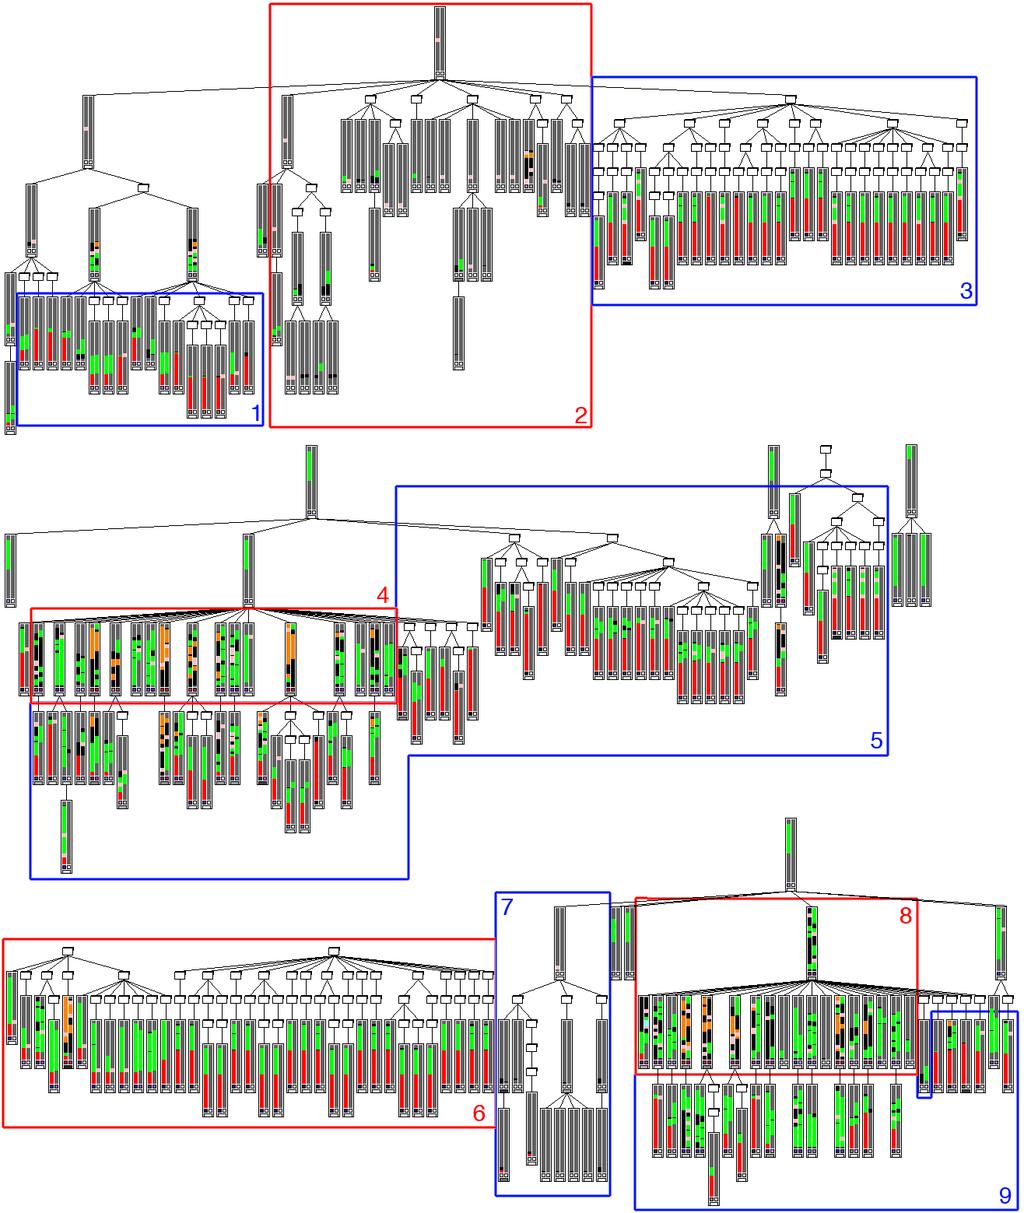 Figure 13. The Discrete Time Figure applied on the entire CalendarClient module of Mozilla. stability of the architecture [14] by using colors to depict the changes. Wu et al.